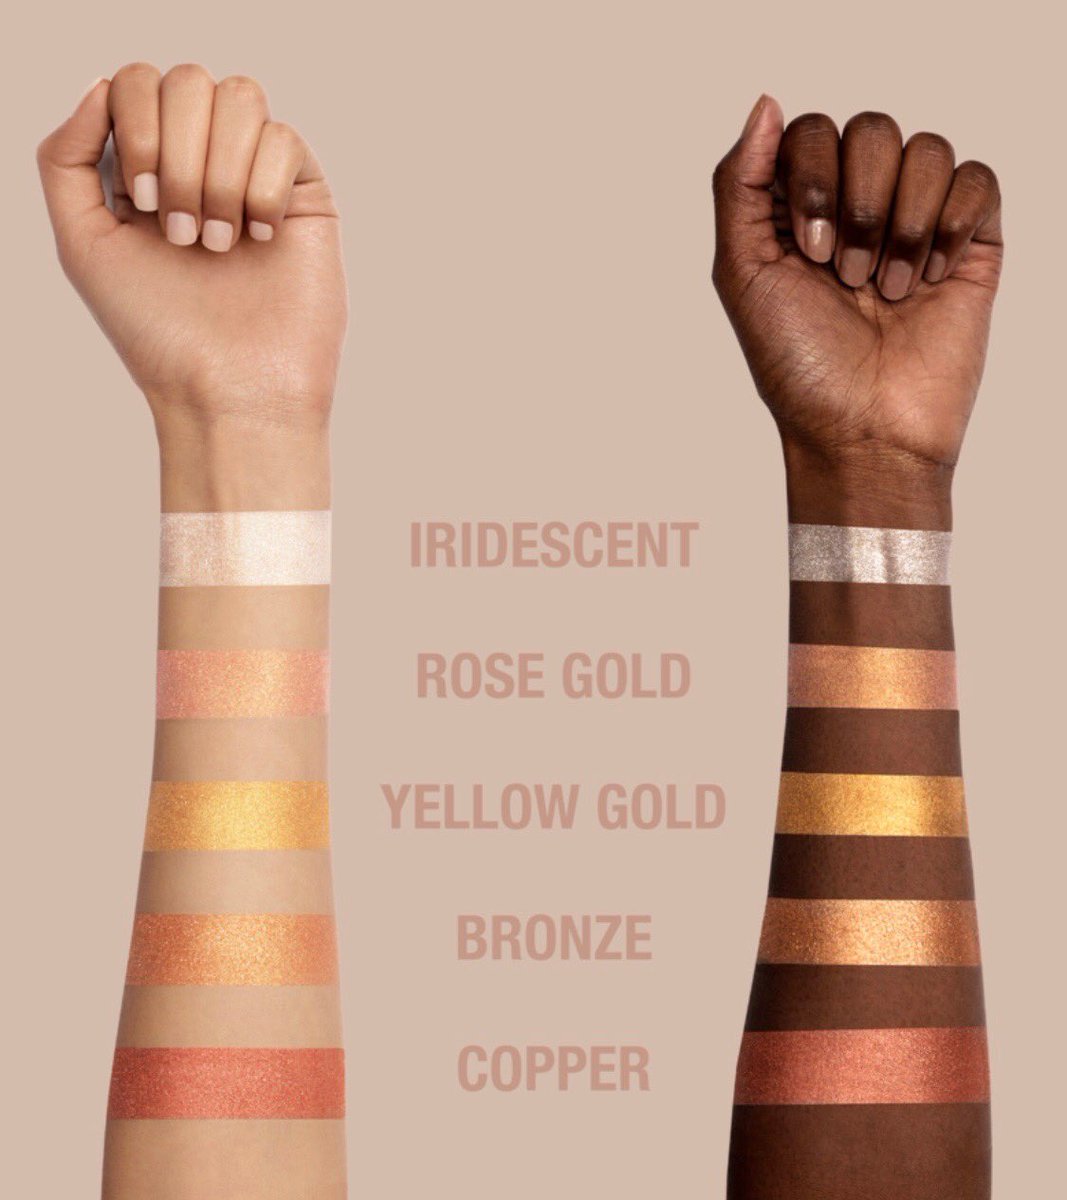 Swatches https://t.co/aIjp1MBlpZ https://t.co/BnazEHfh3o